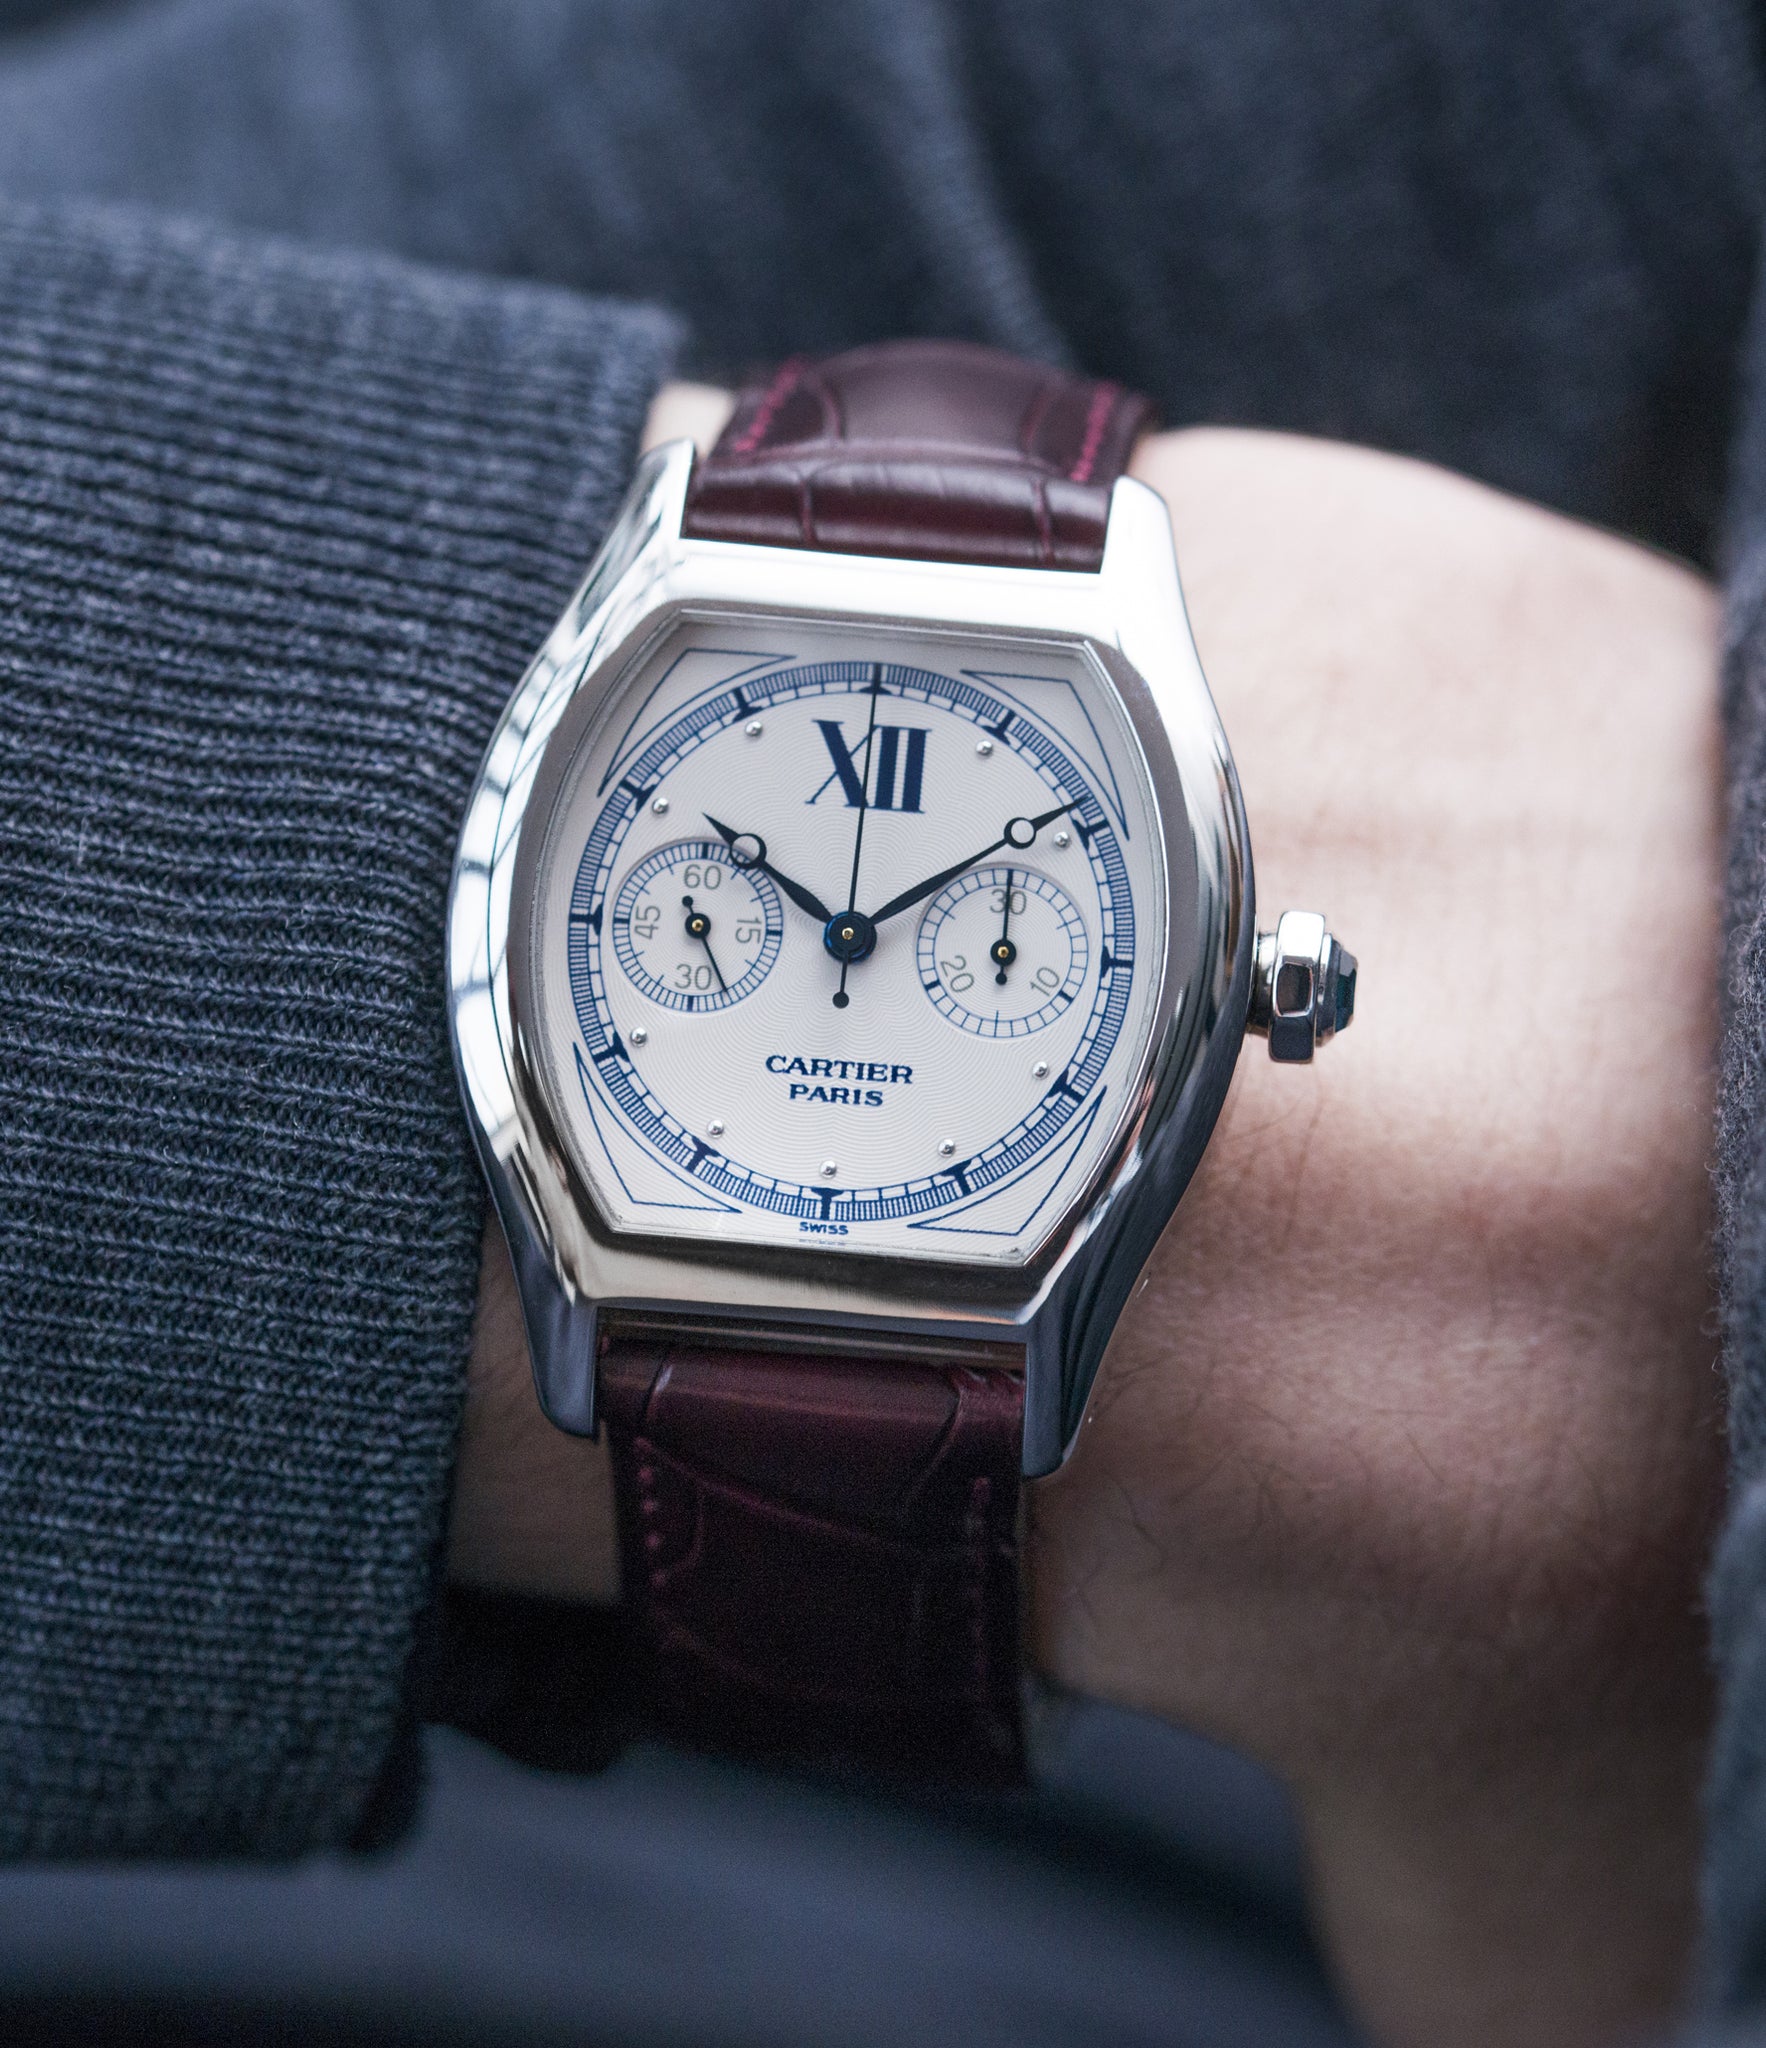 selling Cartier Monopusher Monopoussoir ref. 2396 white gold dress watch with THA ebauche for sale online at A Collected Man London UK specialist of rare watches